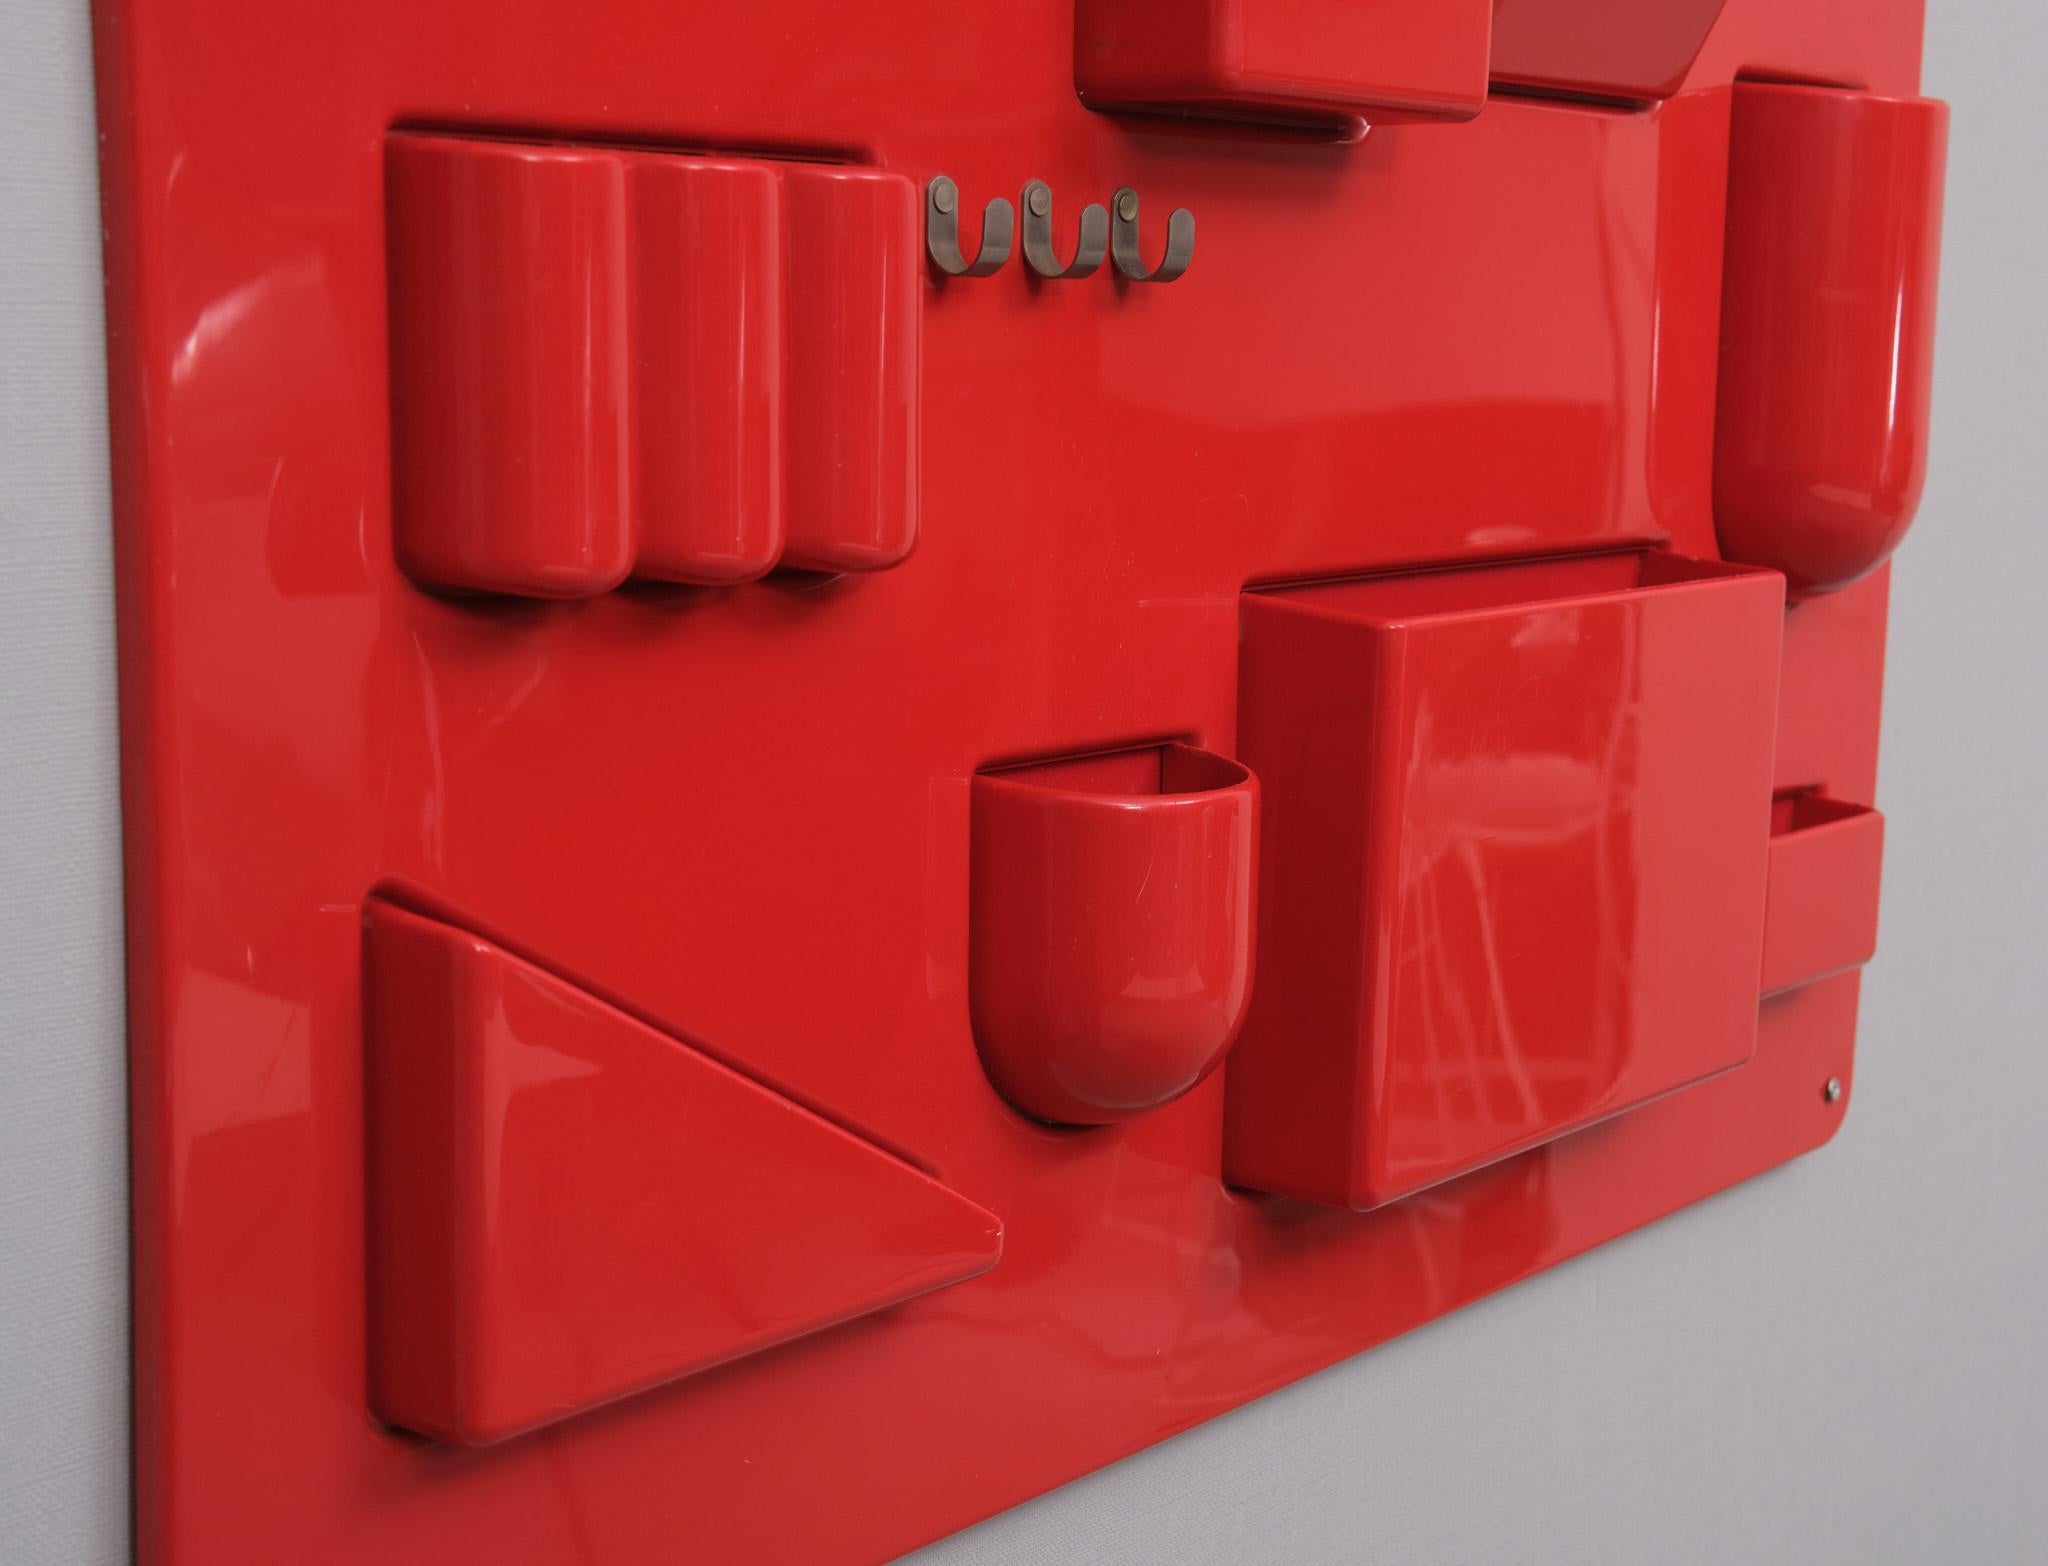 Love this Design and color  Designer - Dorothee Becker Maurer Producer - Design M Model - Ustensilo Wall Organizer Design Period 1970s  Materials - Plastic Color Red  Wear consistent with age a use 